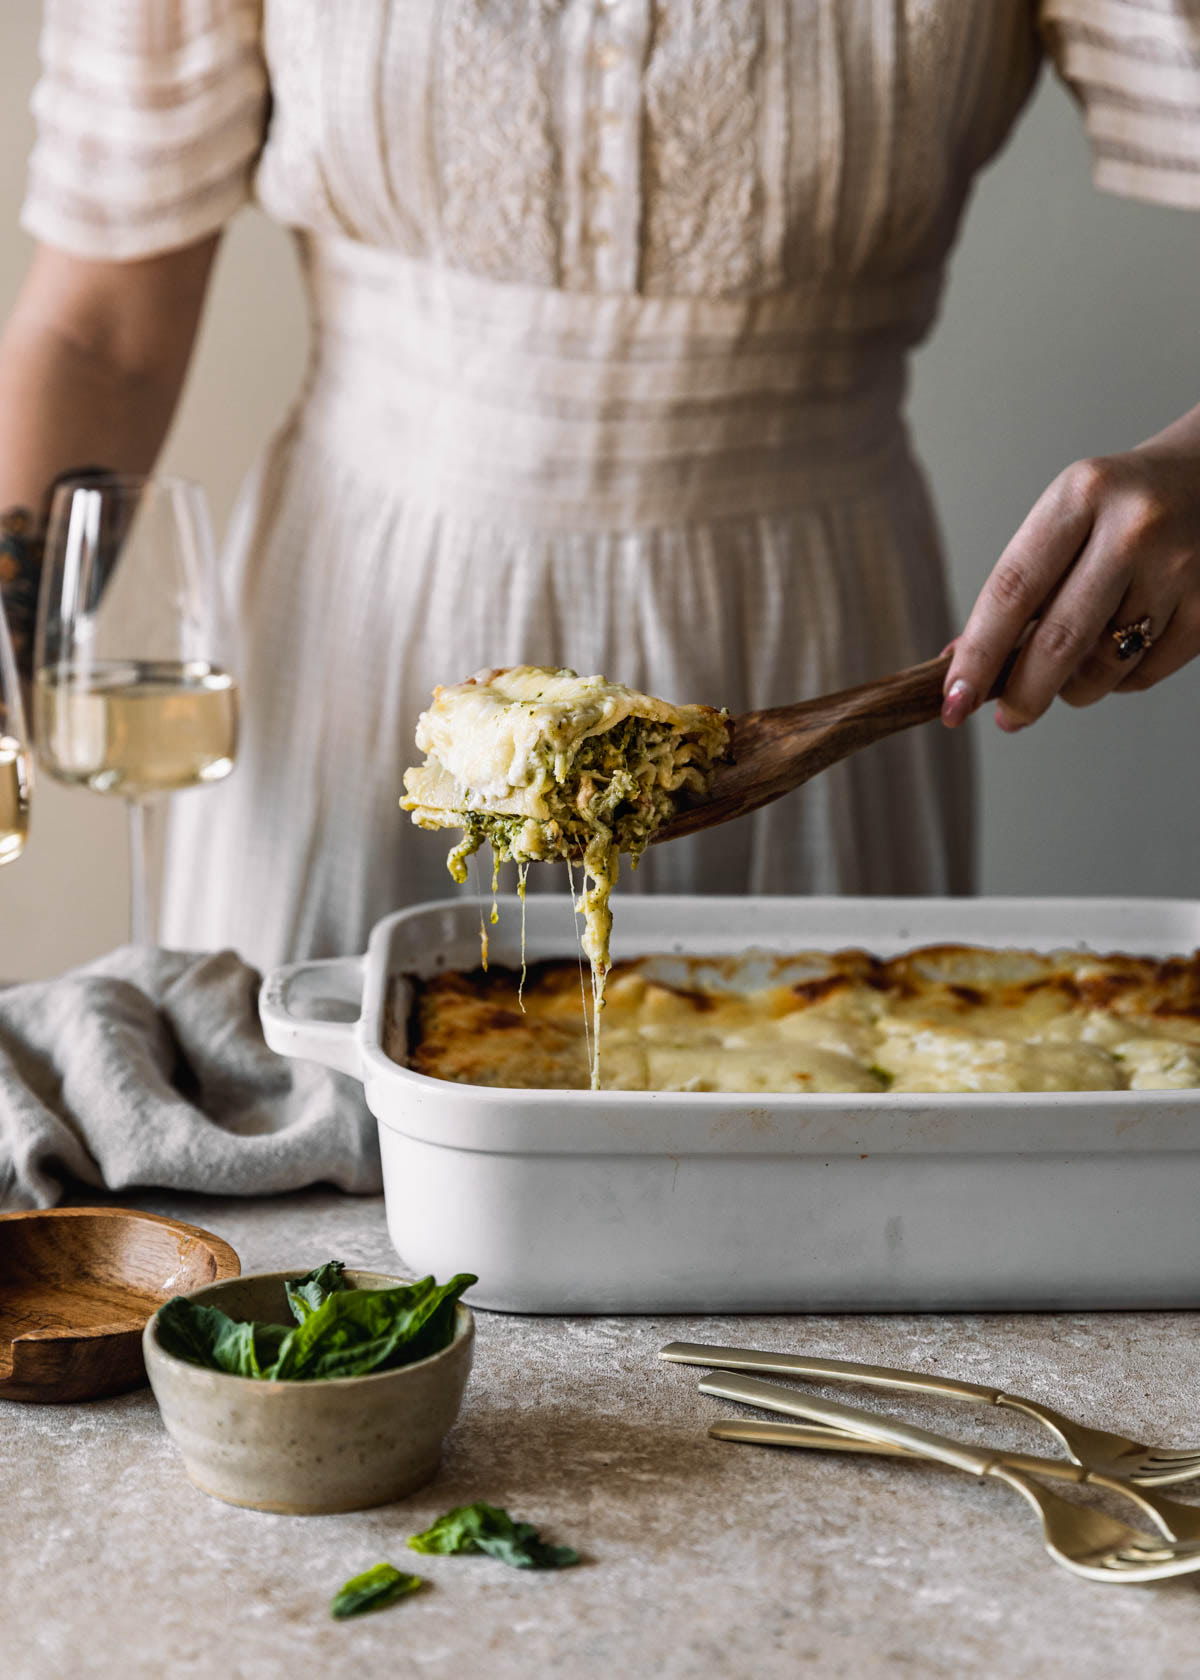 A side image of a woman wearing a white dress spooning white lasagna with pesto and pancetta out of a white casserole dish on a beige table. The lasagna is next to a white bowl of basil, a beige linen, and two glasses of white wine.